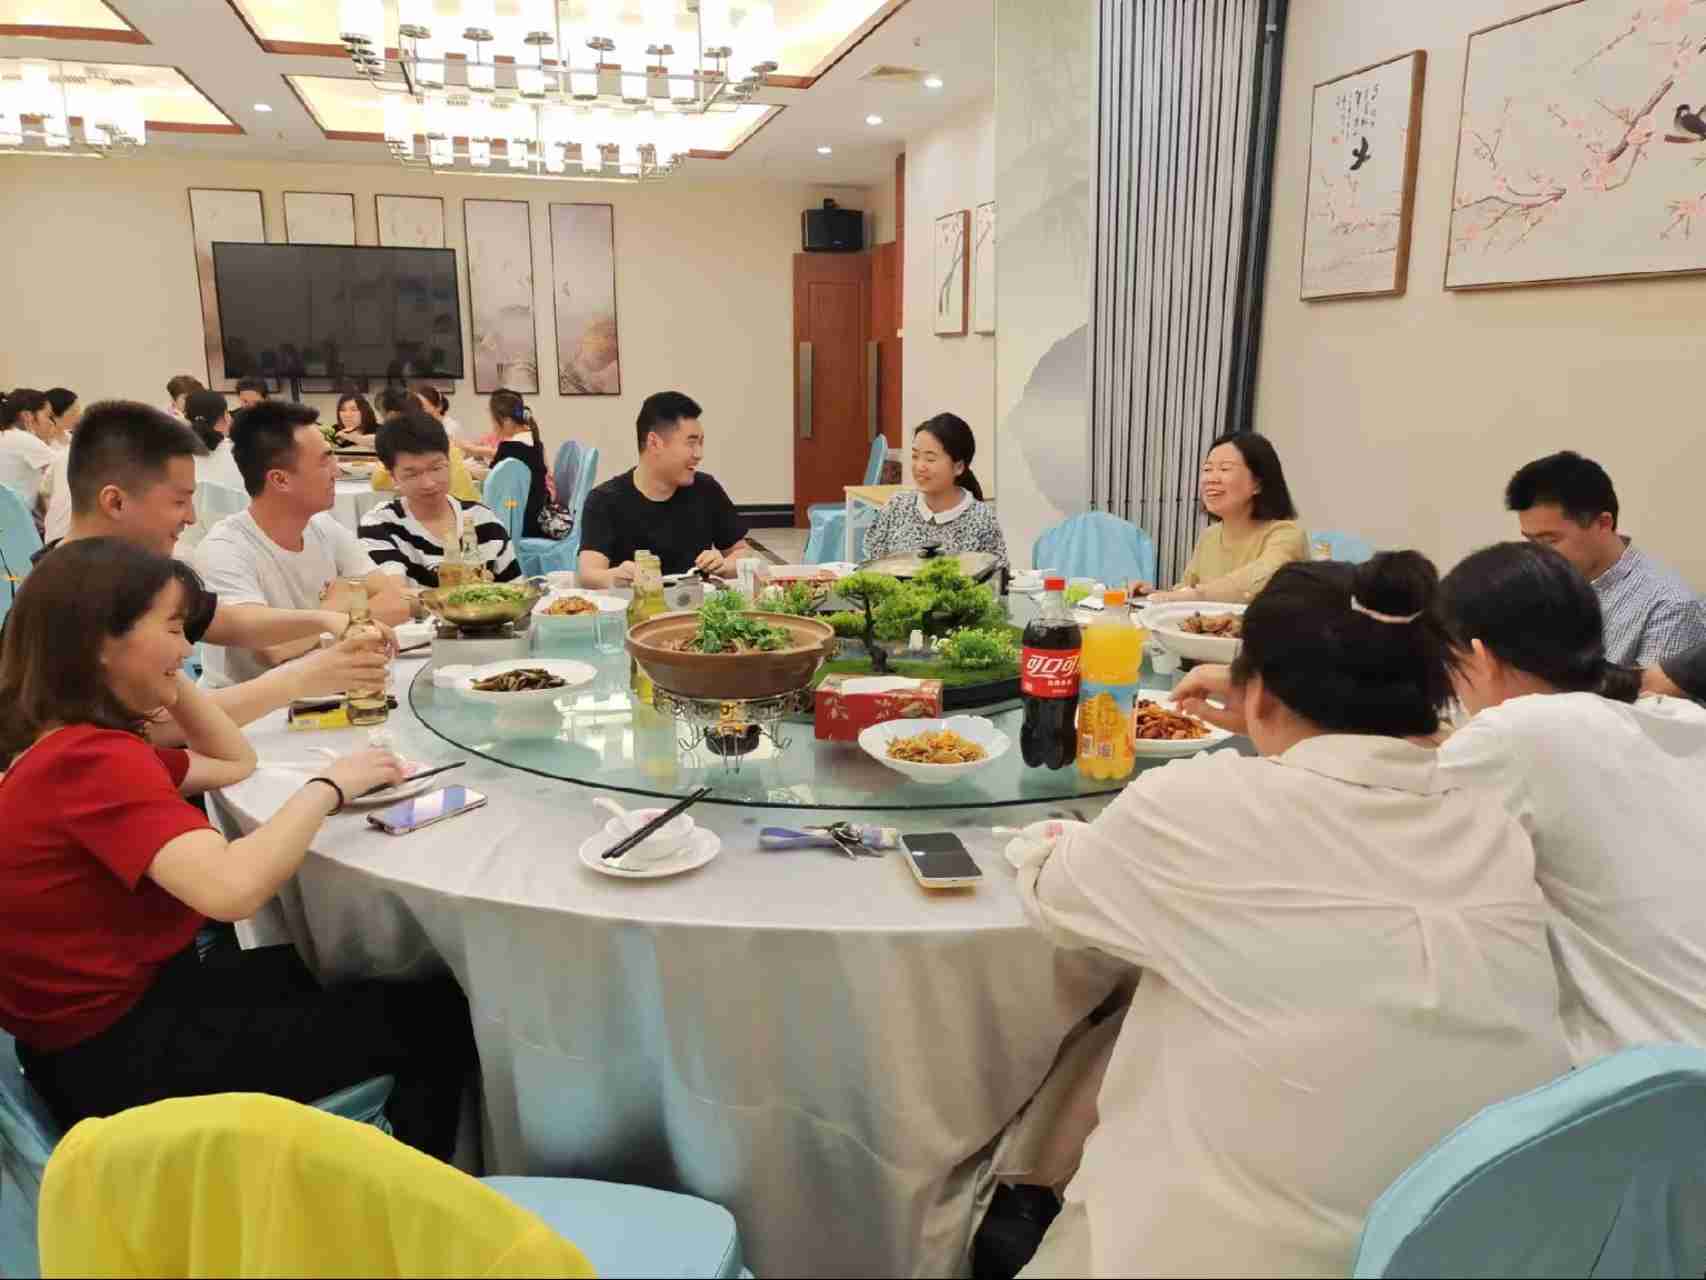 The company held a reunion dinner event